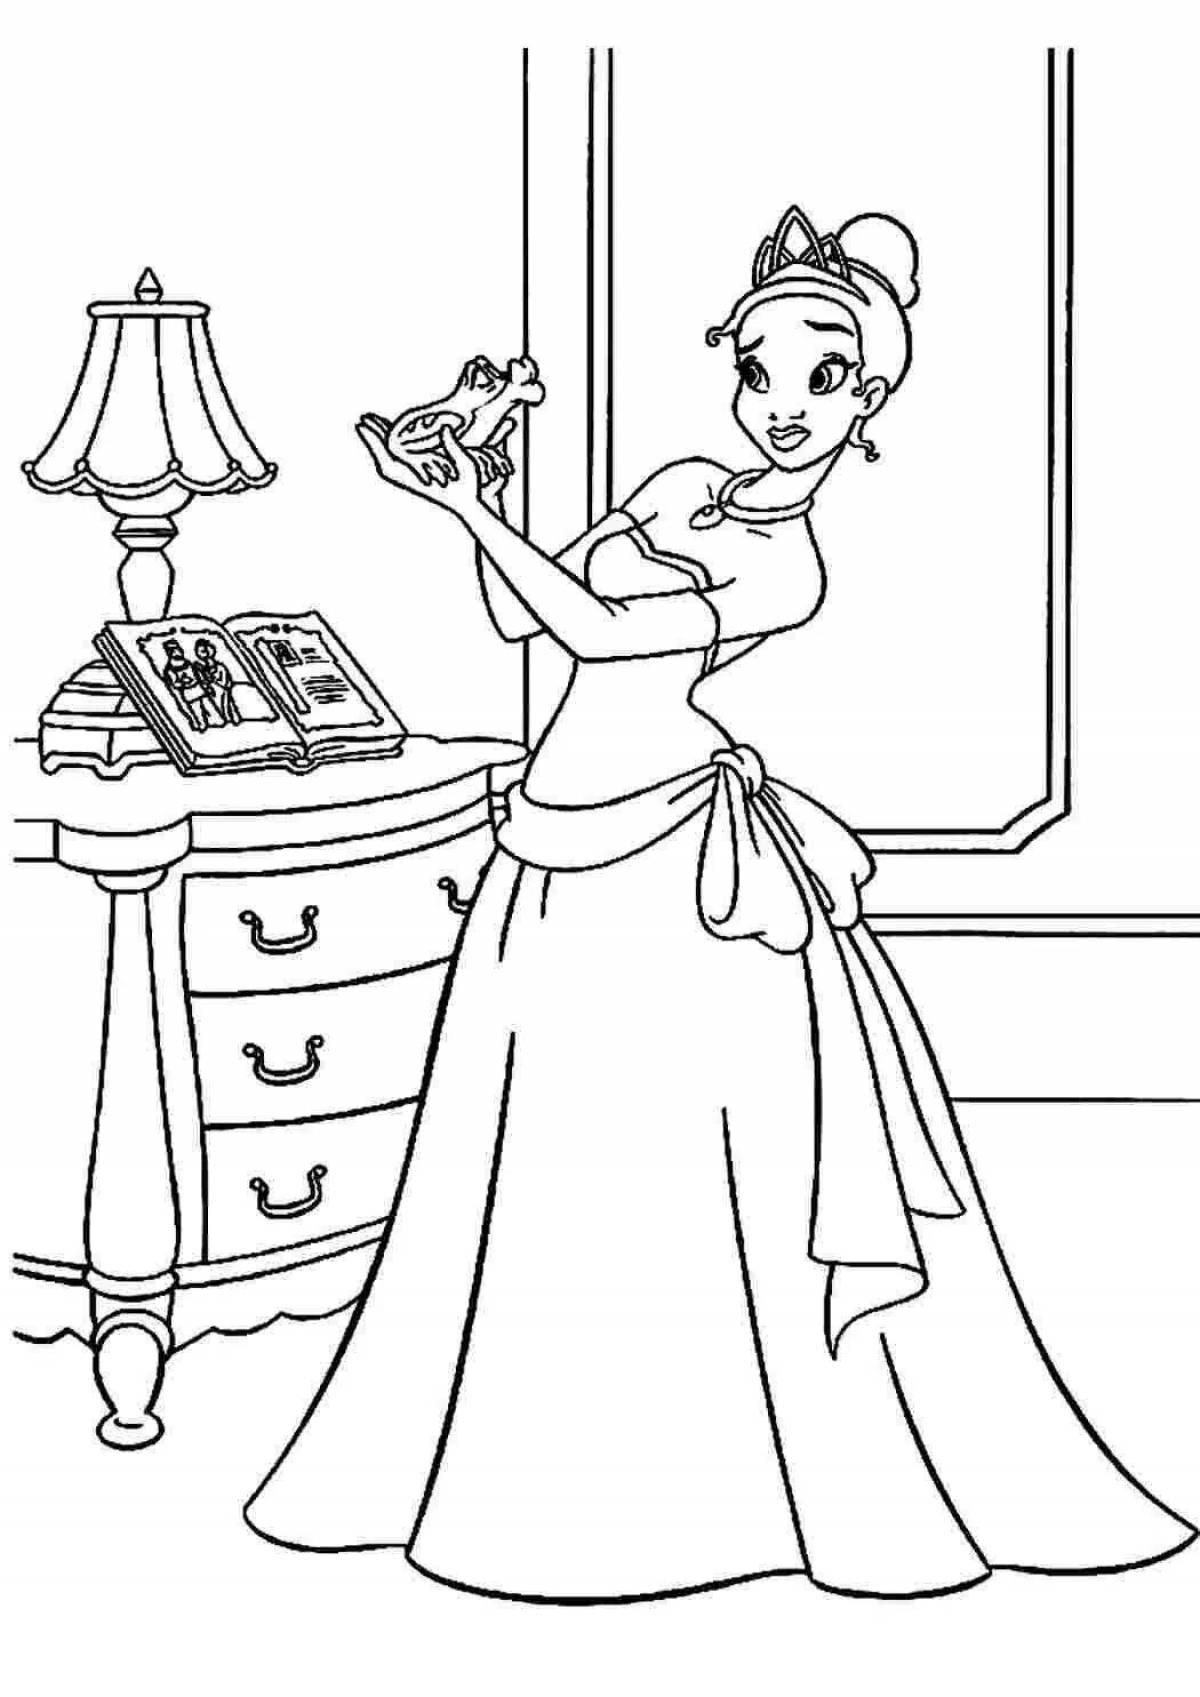 A fun coloring book for kids with Disney princesses